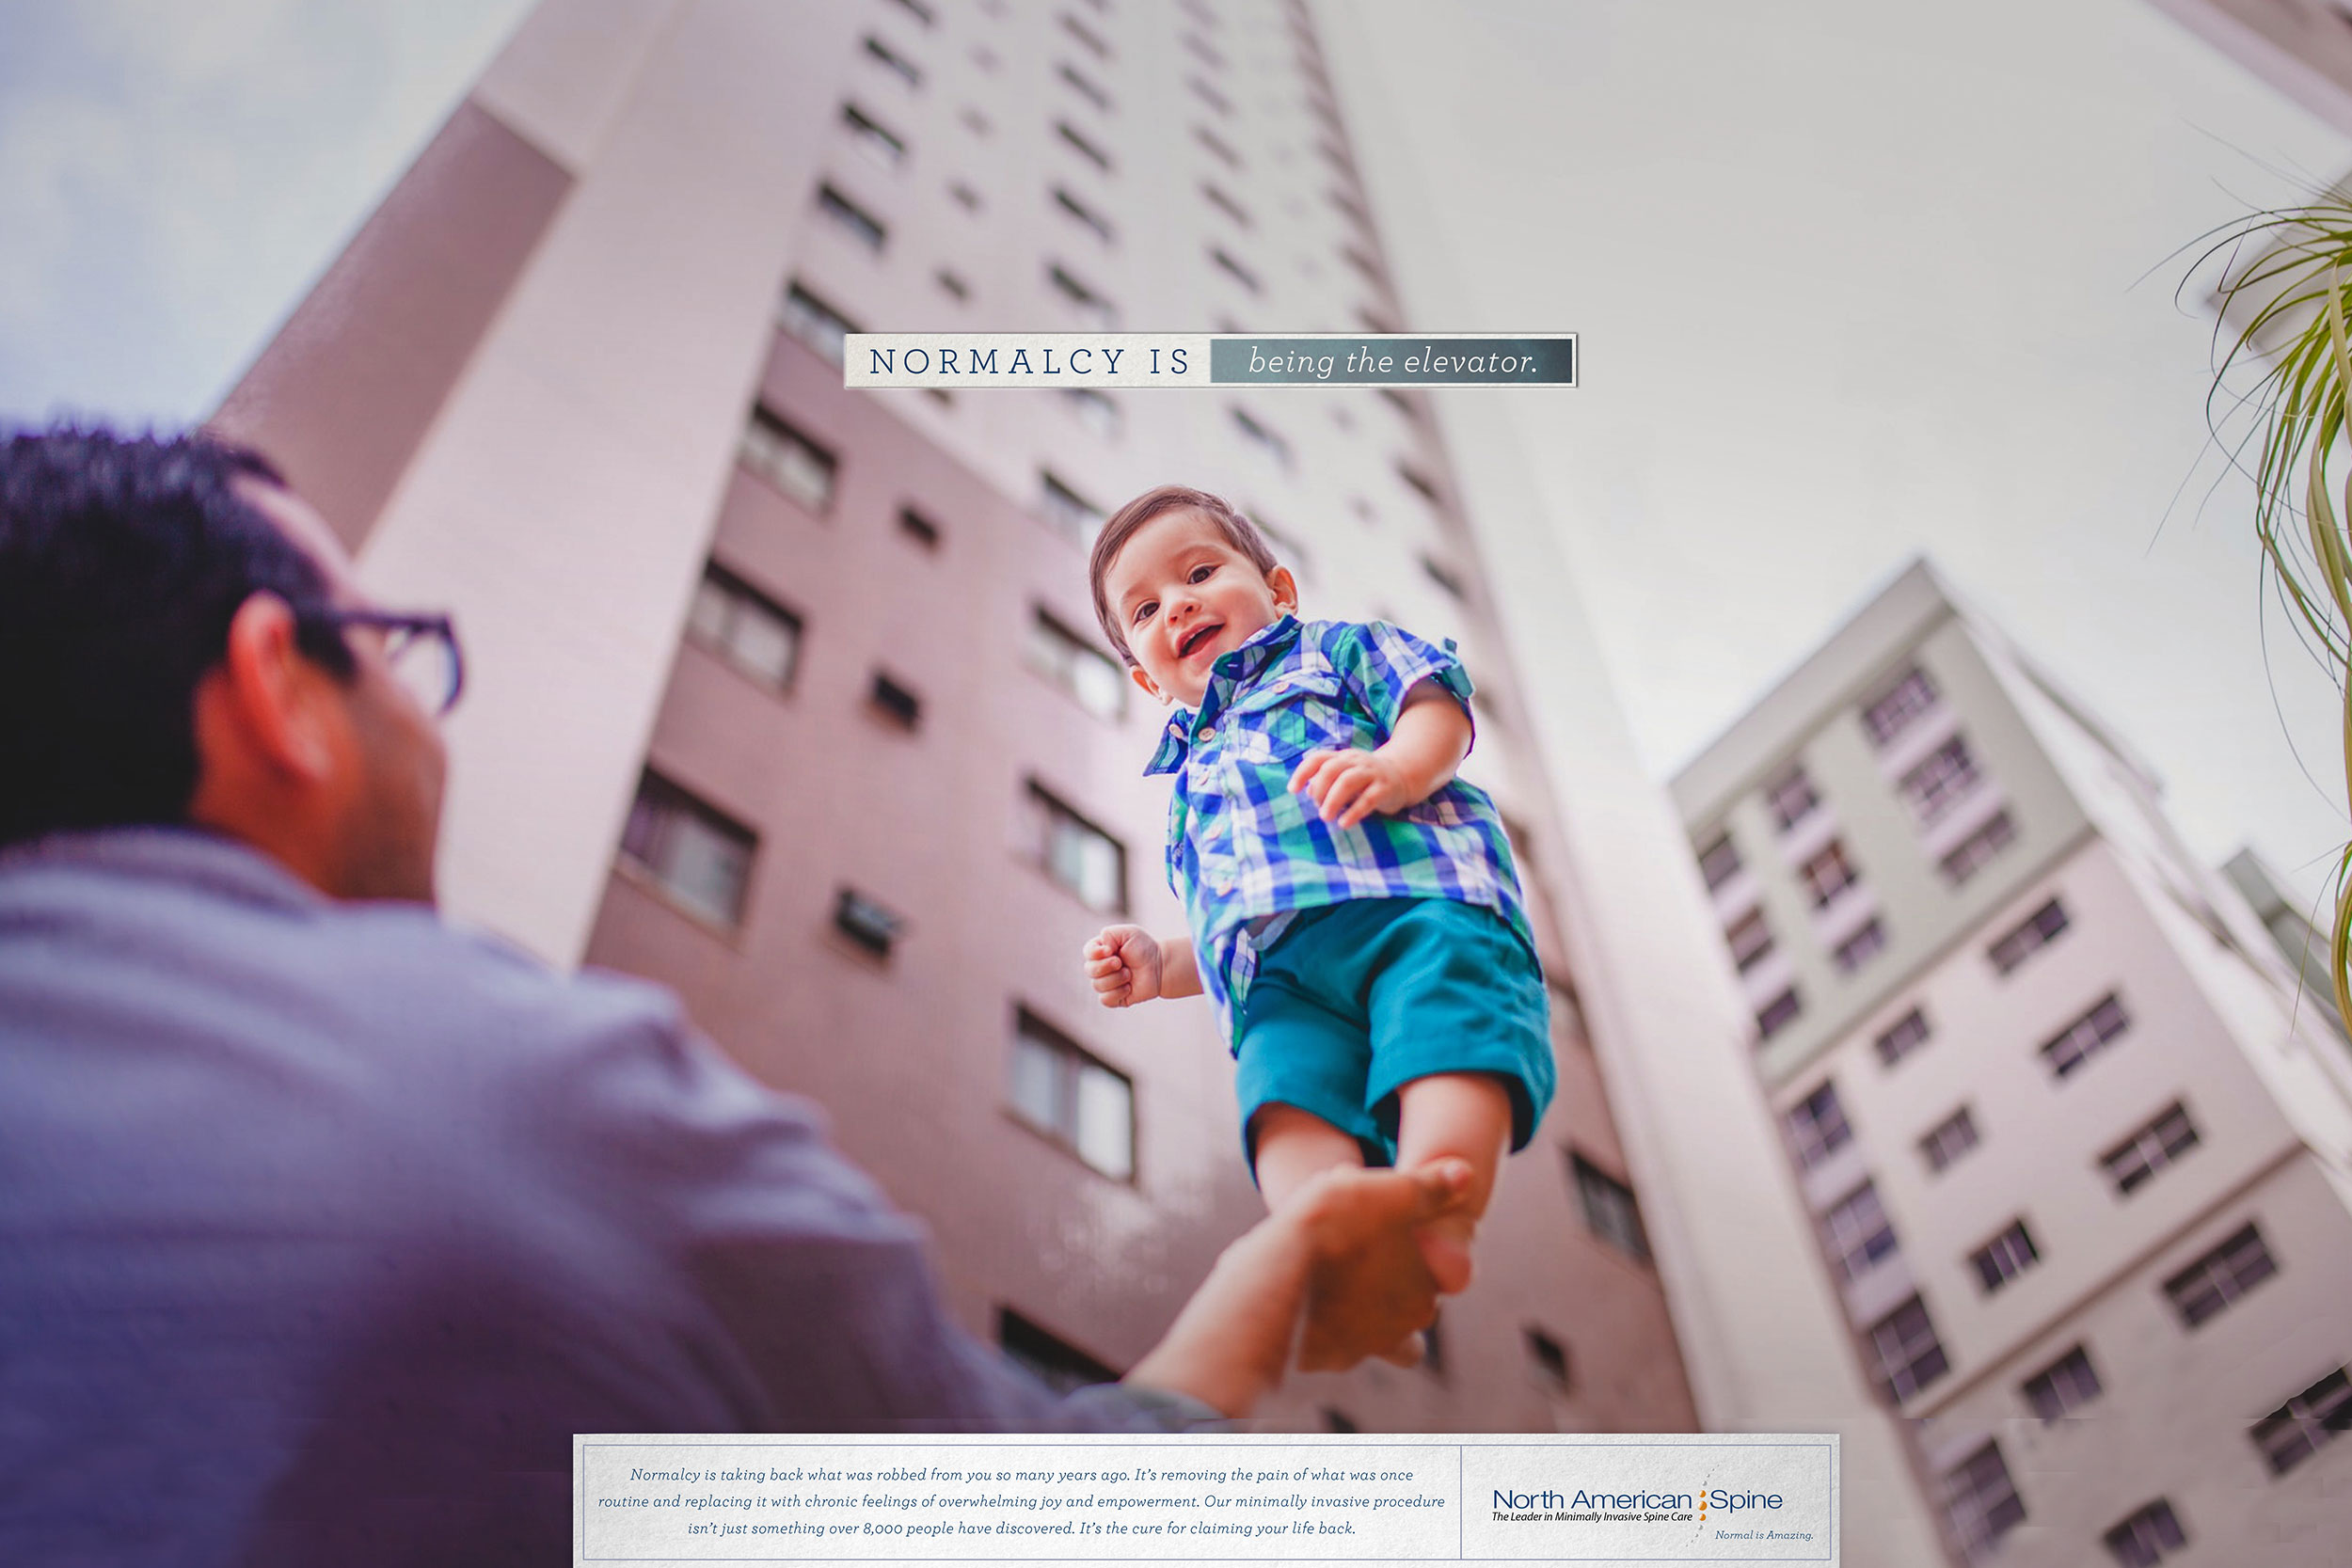 man holding baby up ad for North American spine institute normalcy is being the elevator